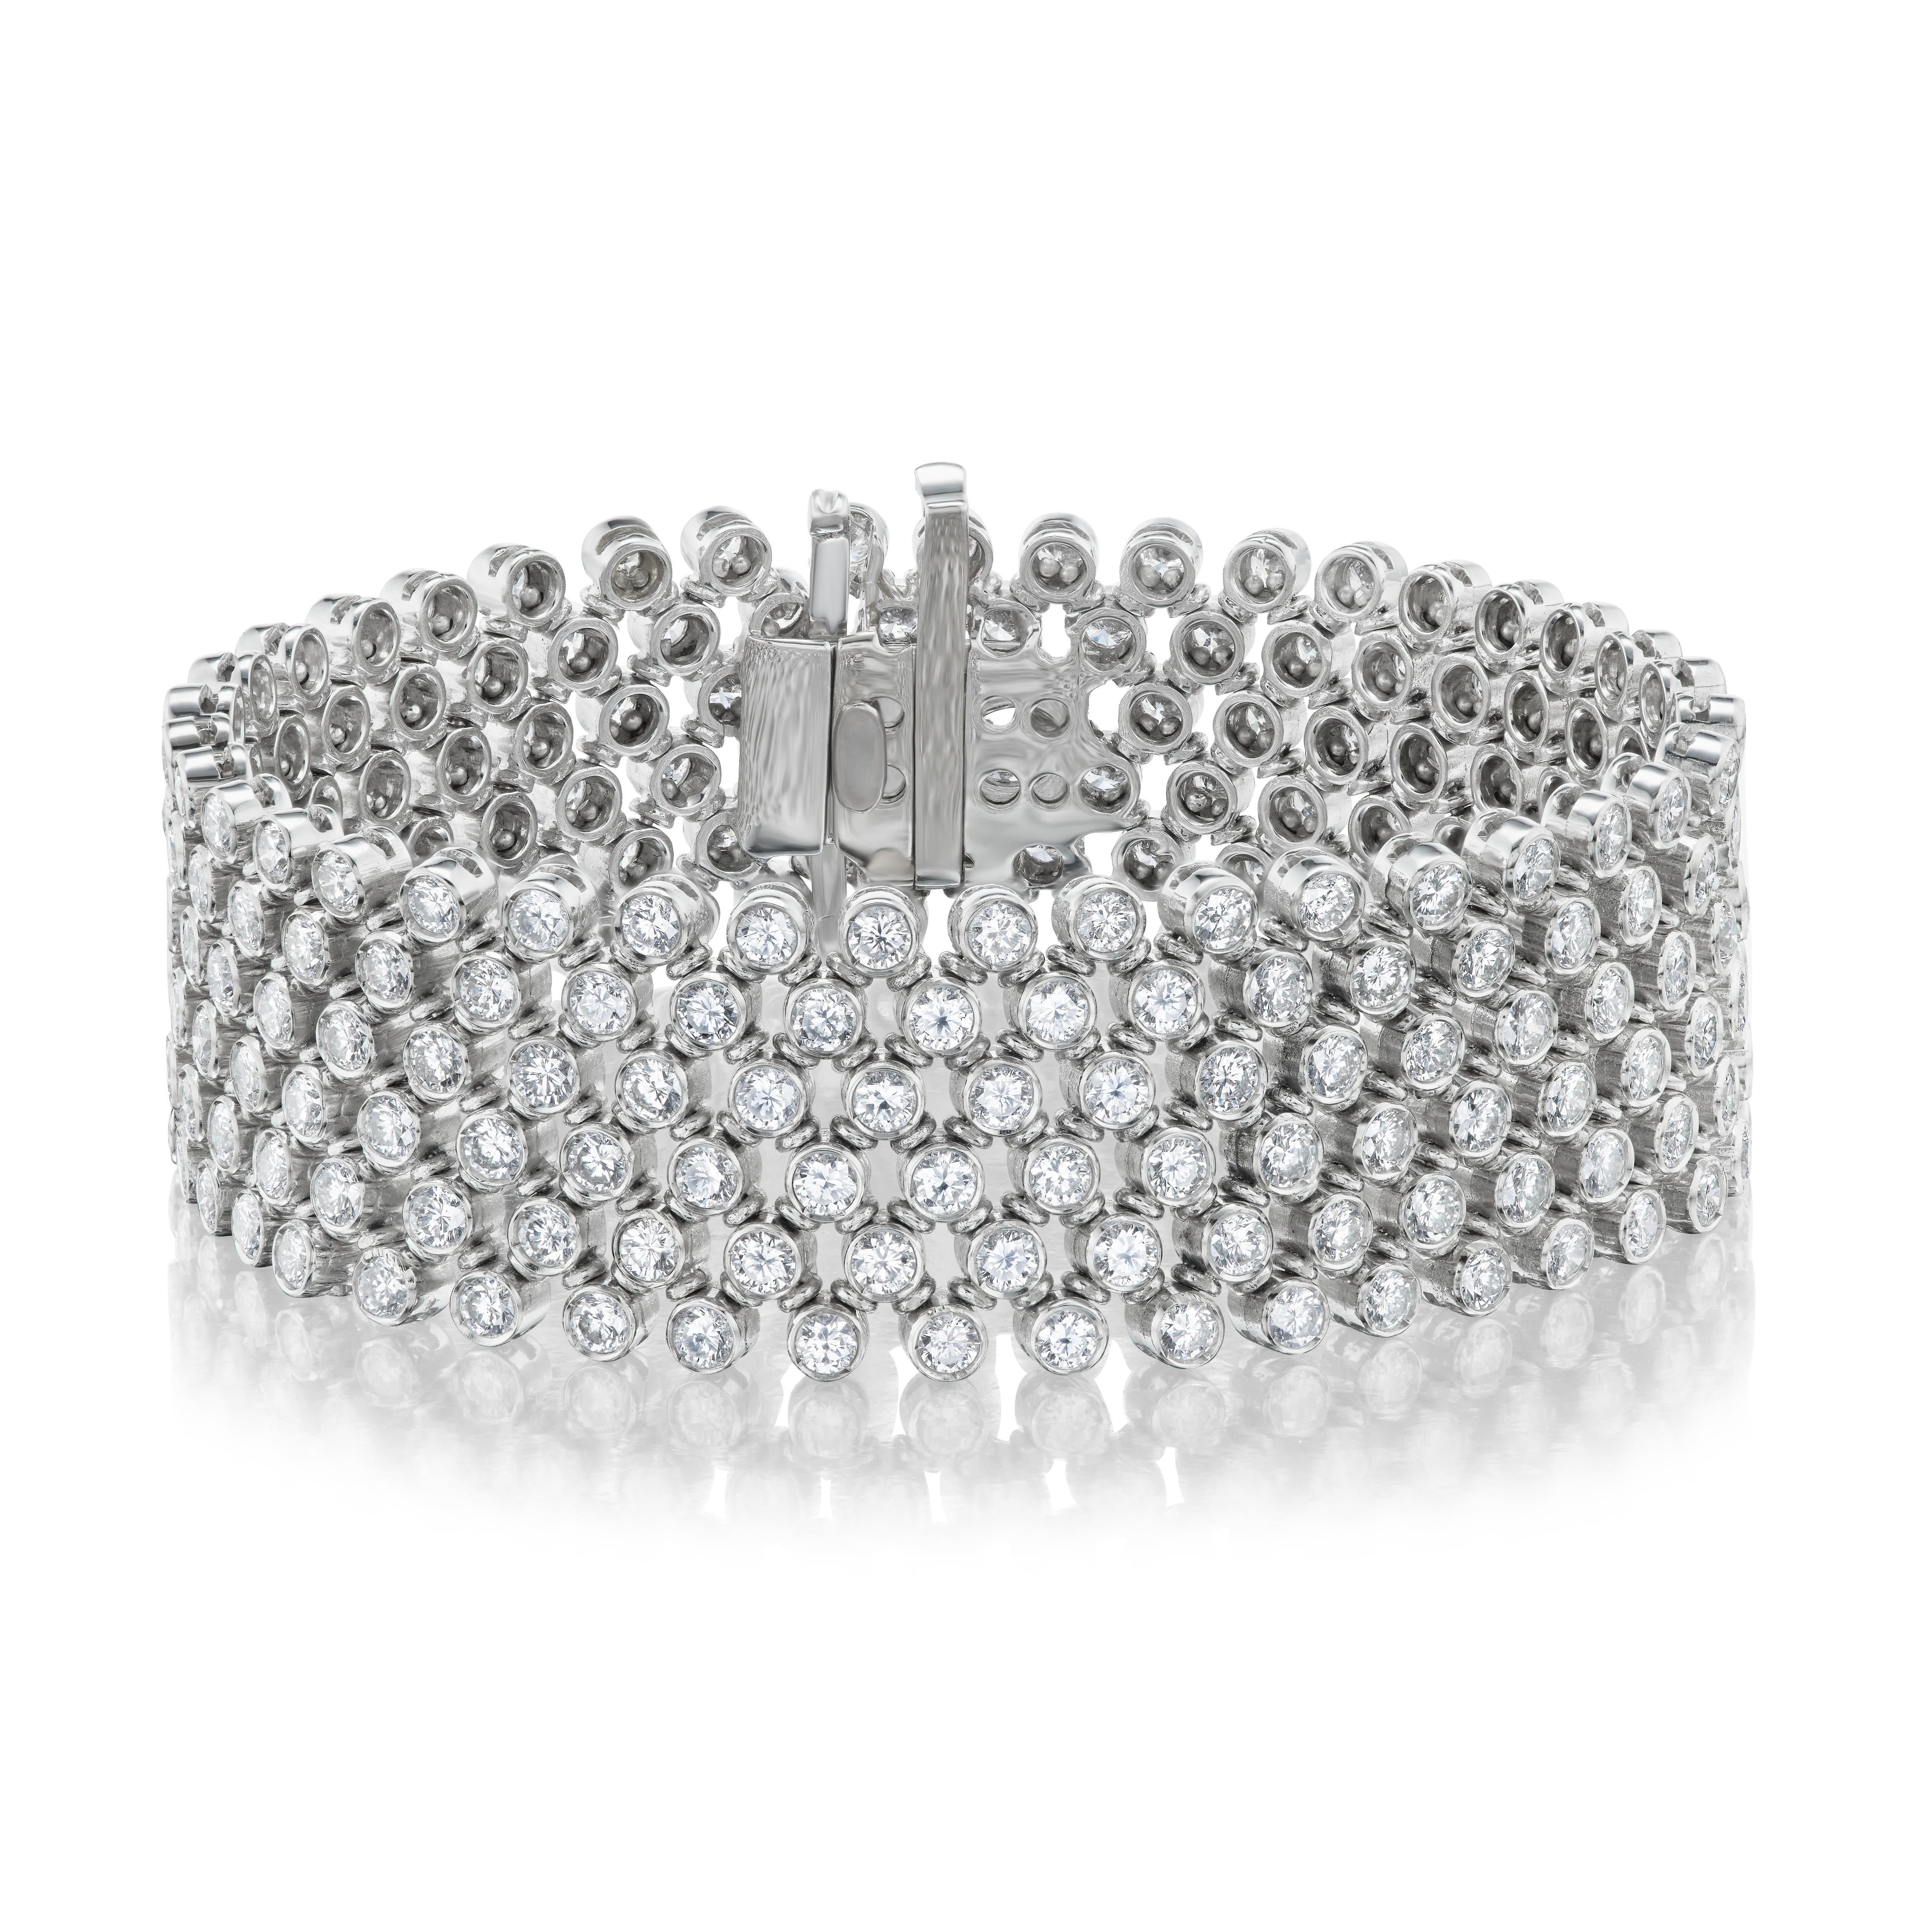 Six rows of perfectly matched, precision set and expertly engineered diamond beauty.  The flexibility is second to none resulting in an extraordinarily comfortable and mesmerizing show of brilliant light.

This wonderful jewel was crafted in